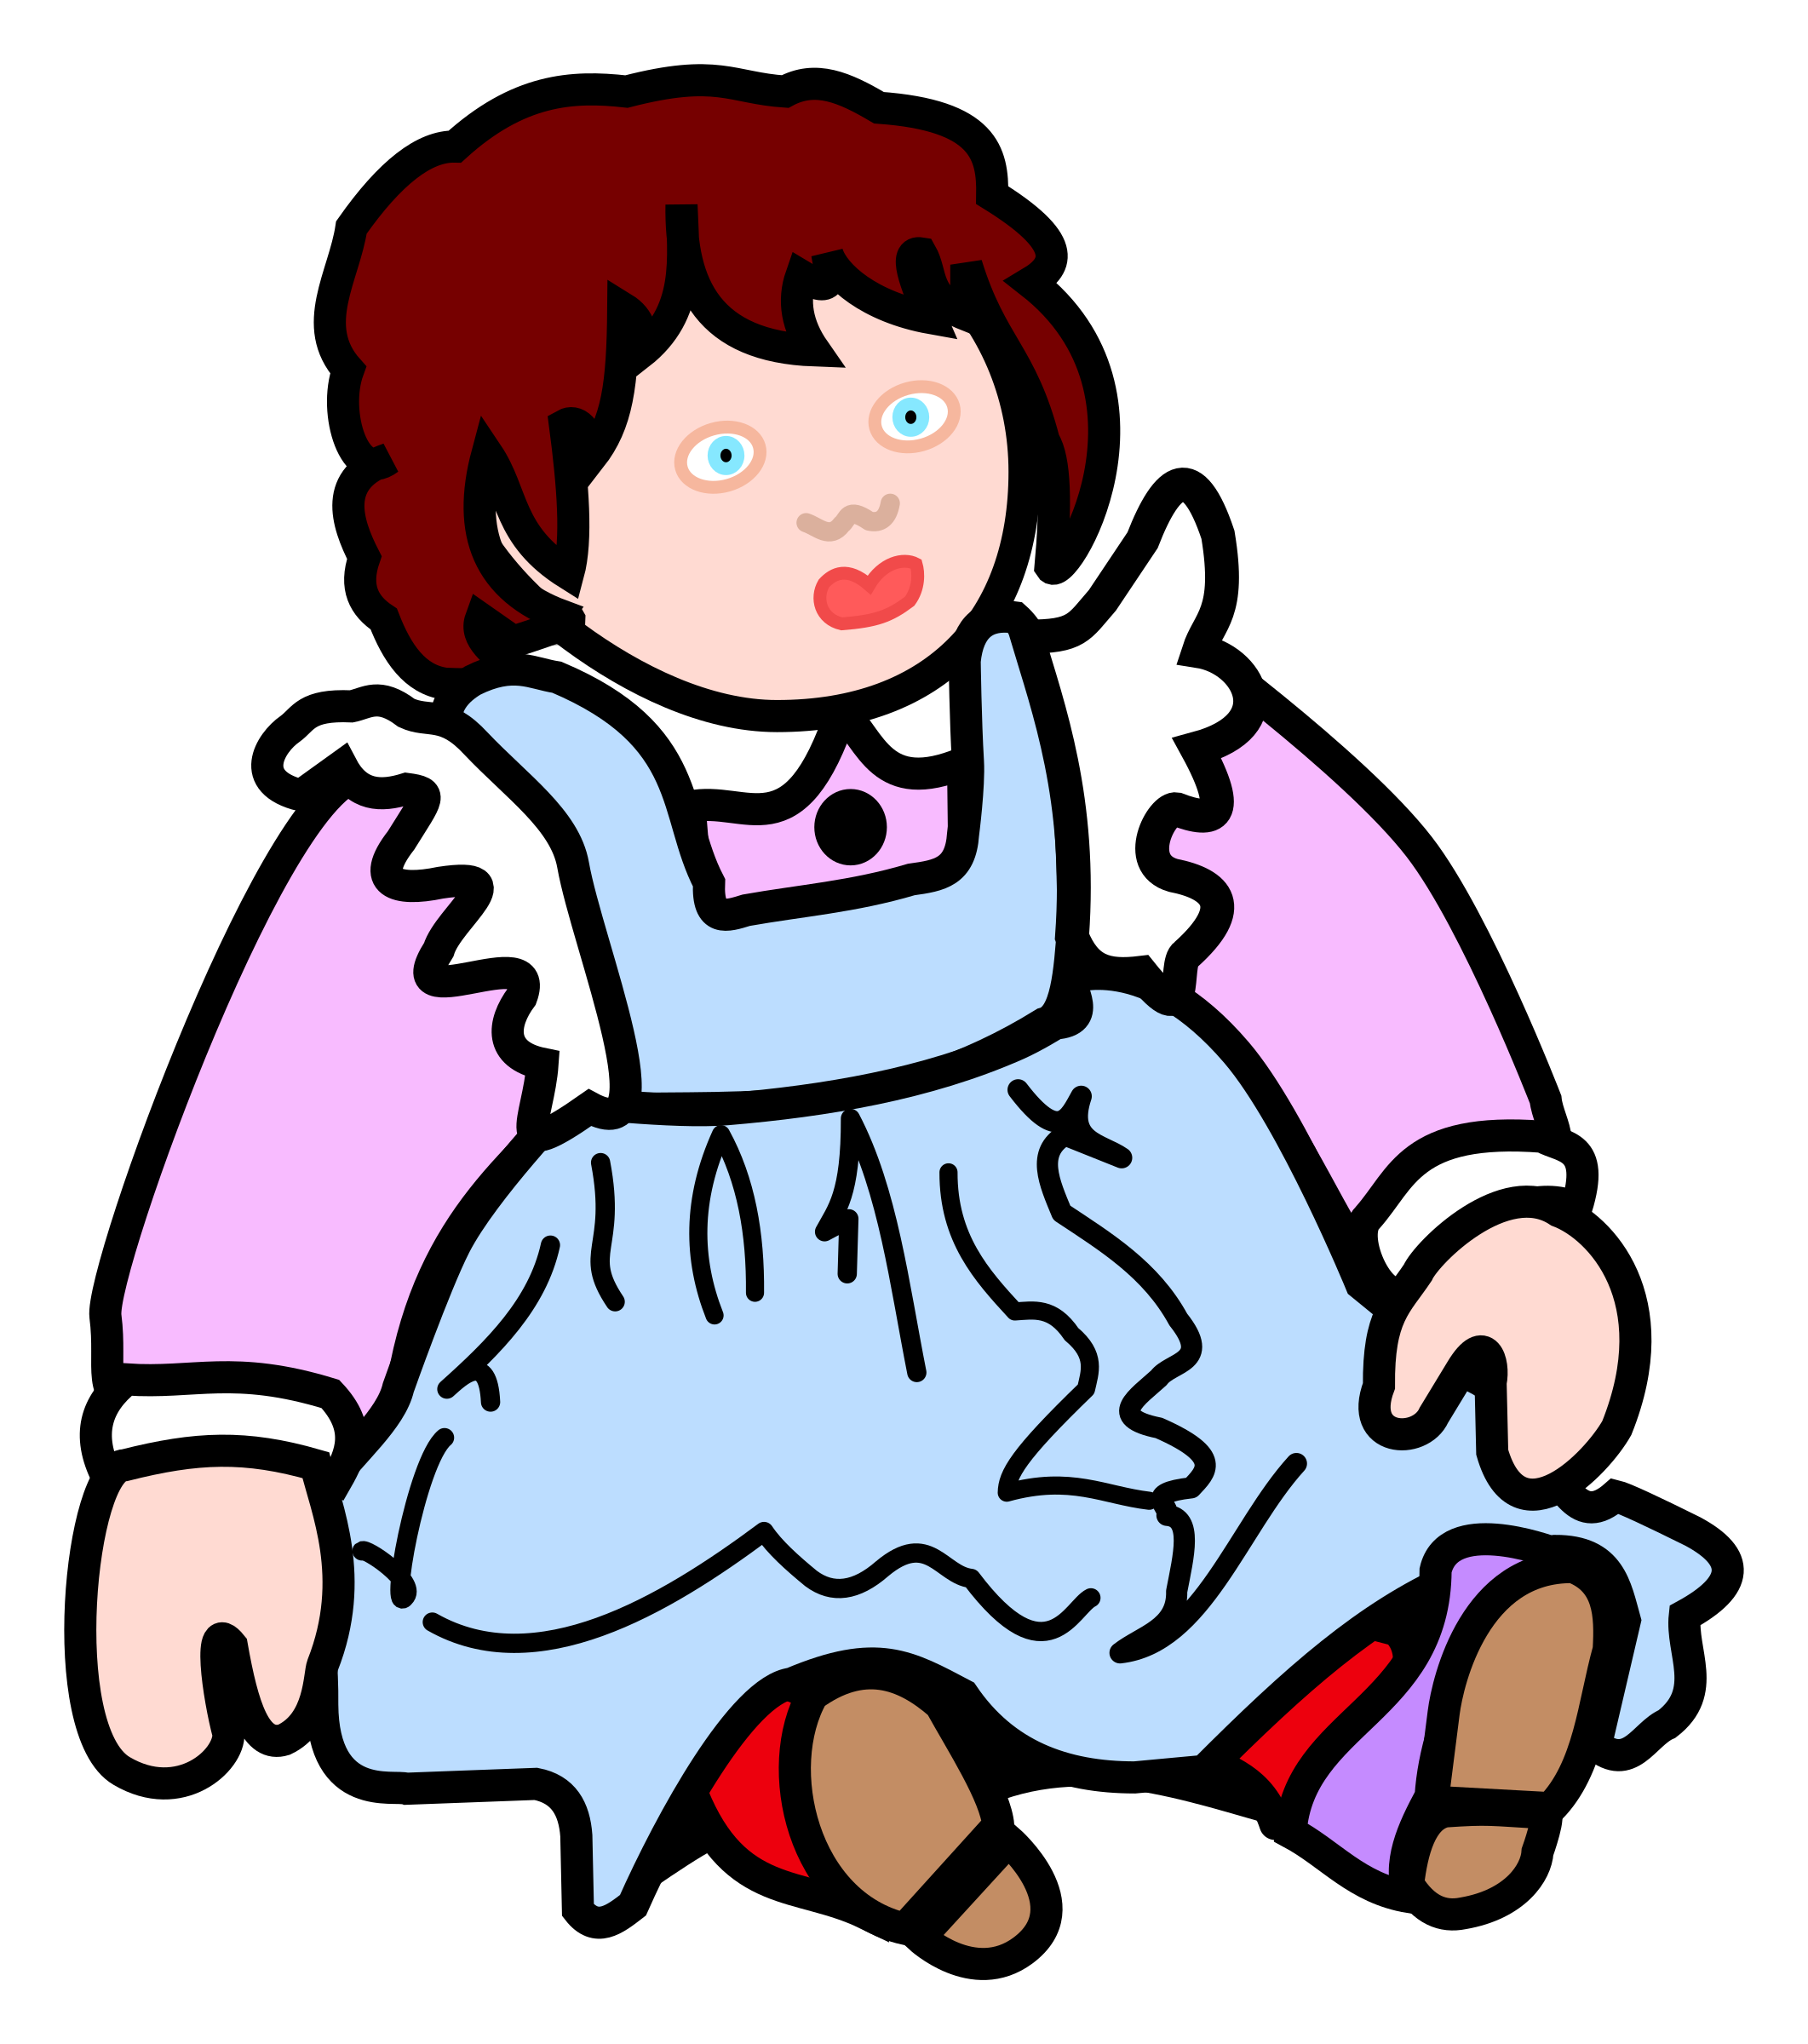 clipart of doll - photo #23